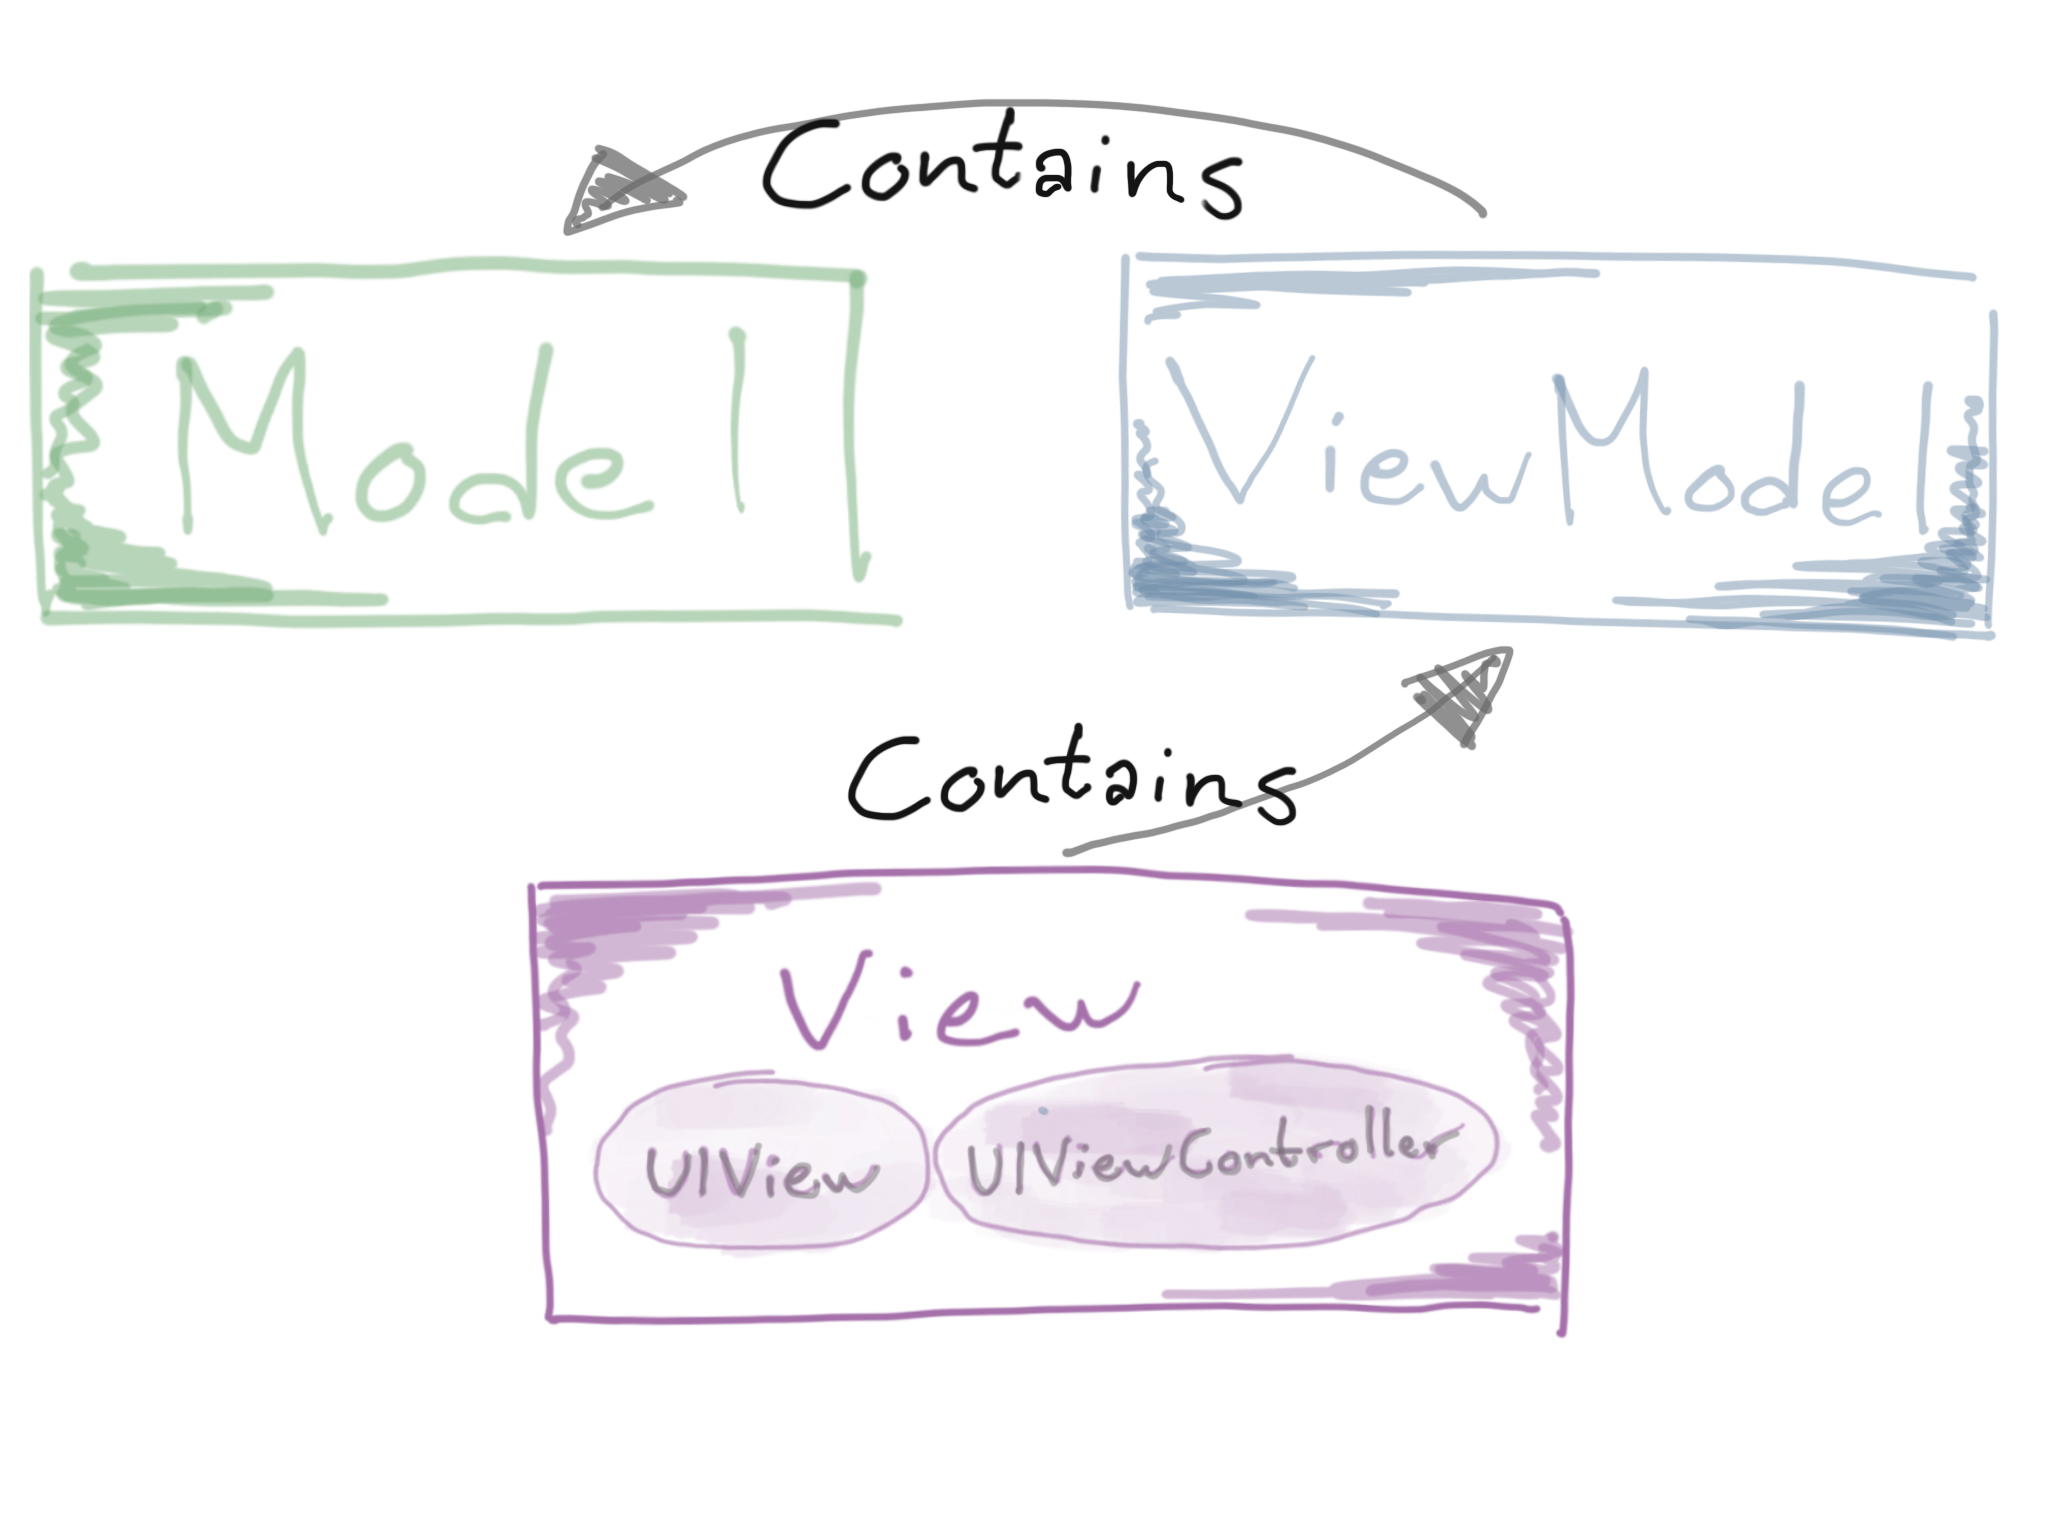 Relationship Between MVVM's Components Visualized